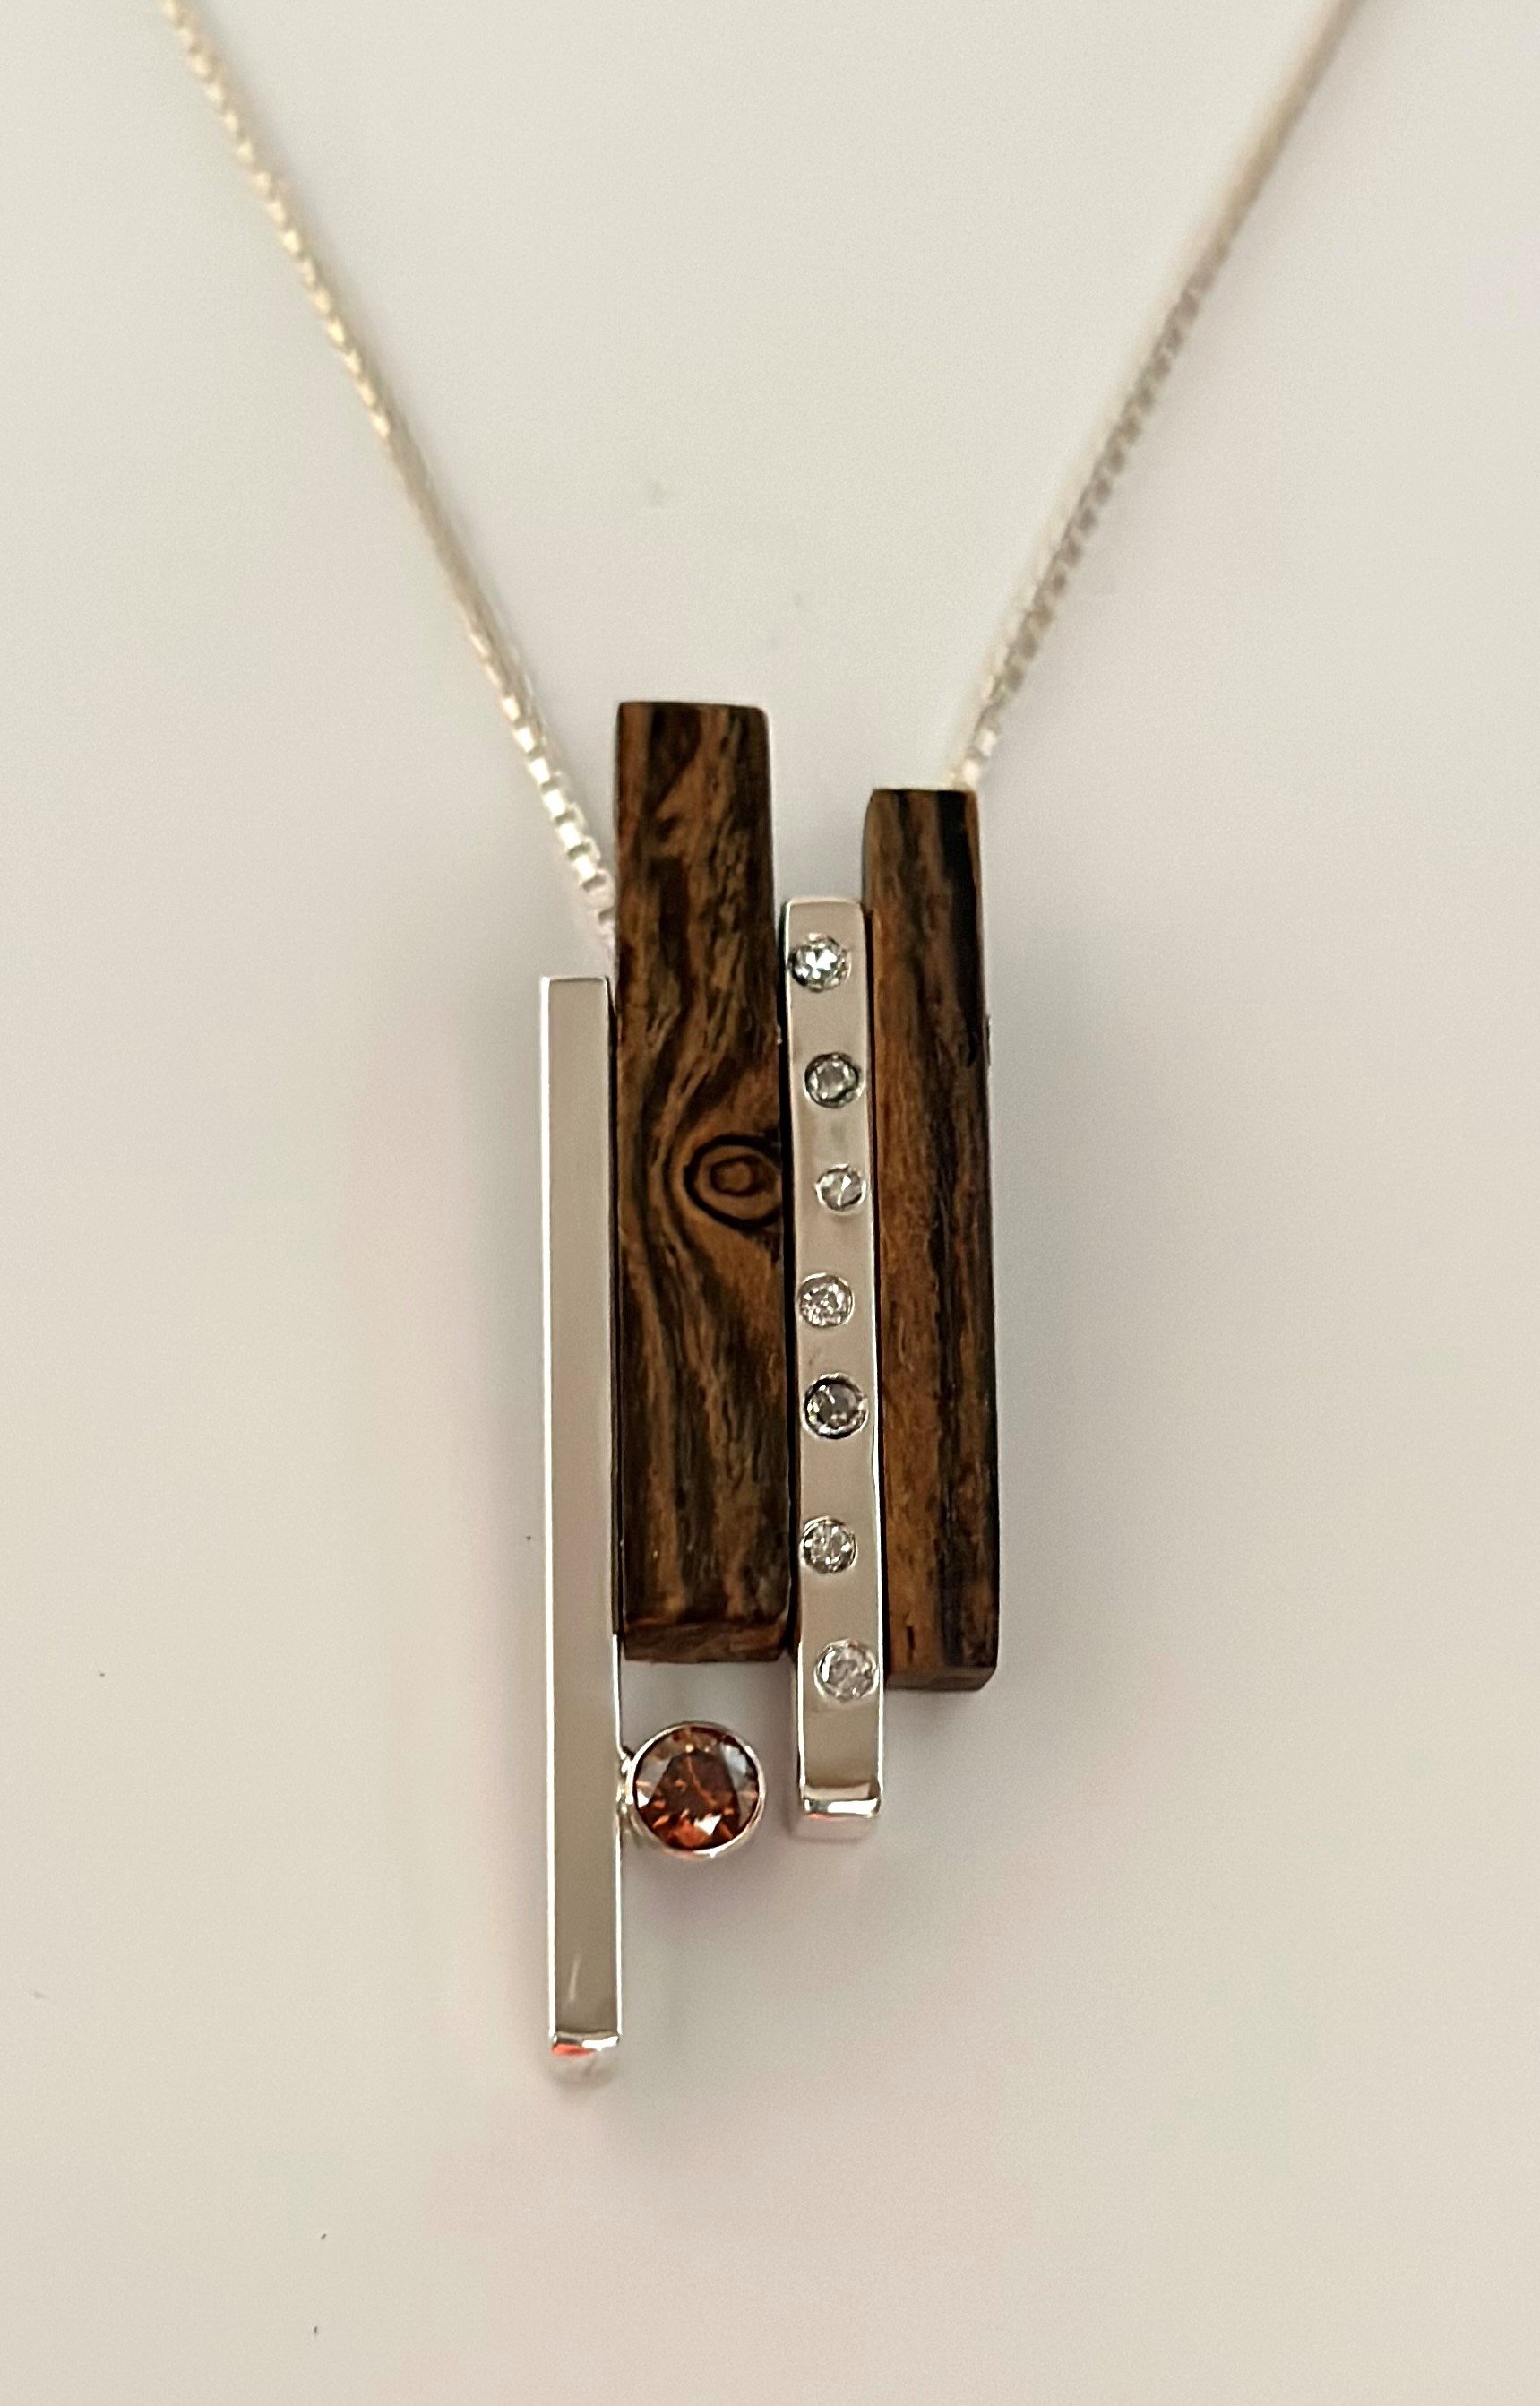  Custom pendant design for a 50th birthday. This pendant has a 1/4 ct cognac round diamond with 7 diamonds to signify a birthday on the 7th of the month. Bocote wood with anti tarnish sterling silver and white gold bezel were used in this pendant.  